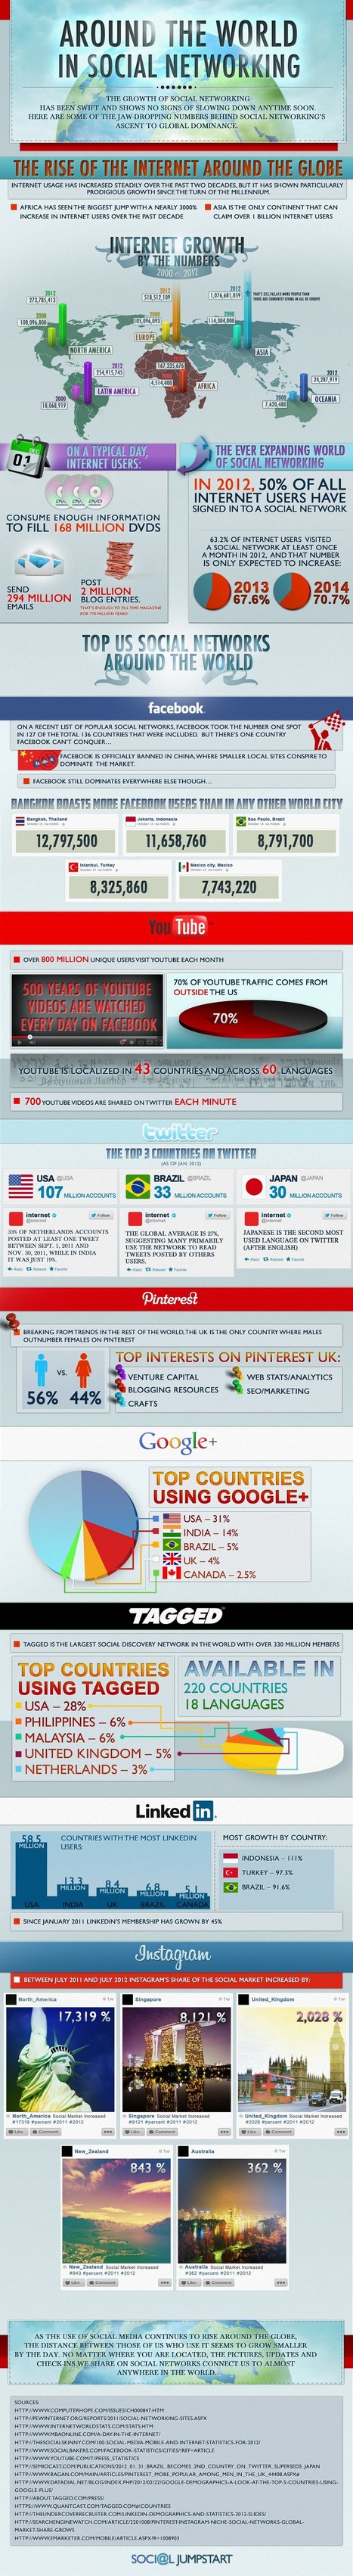 Social Media Around the World: A Complete Infographic Guide | Web 2.0 for juandoming | Scoop.it